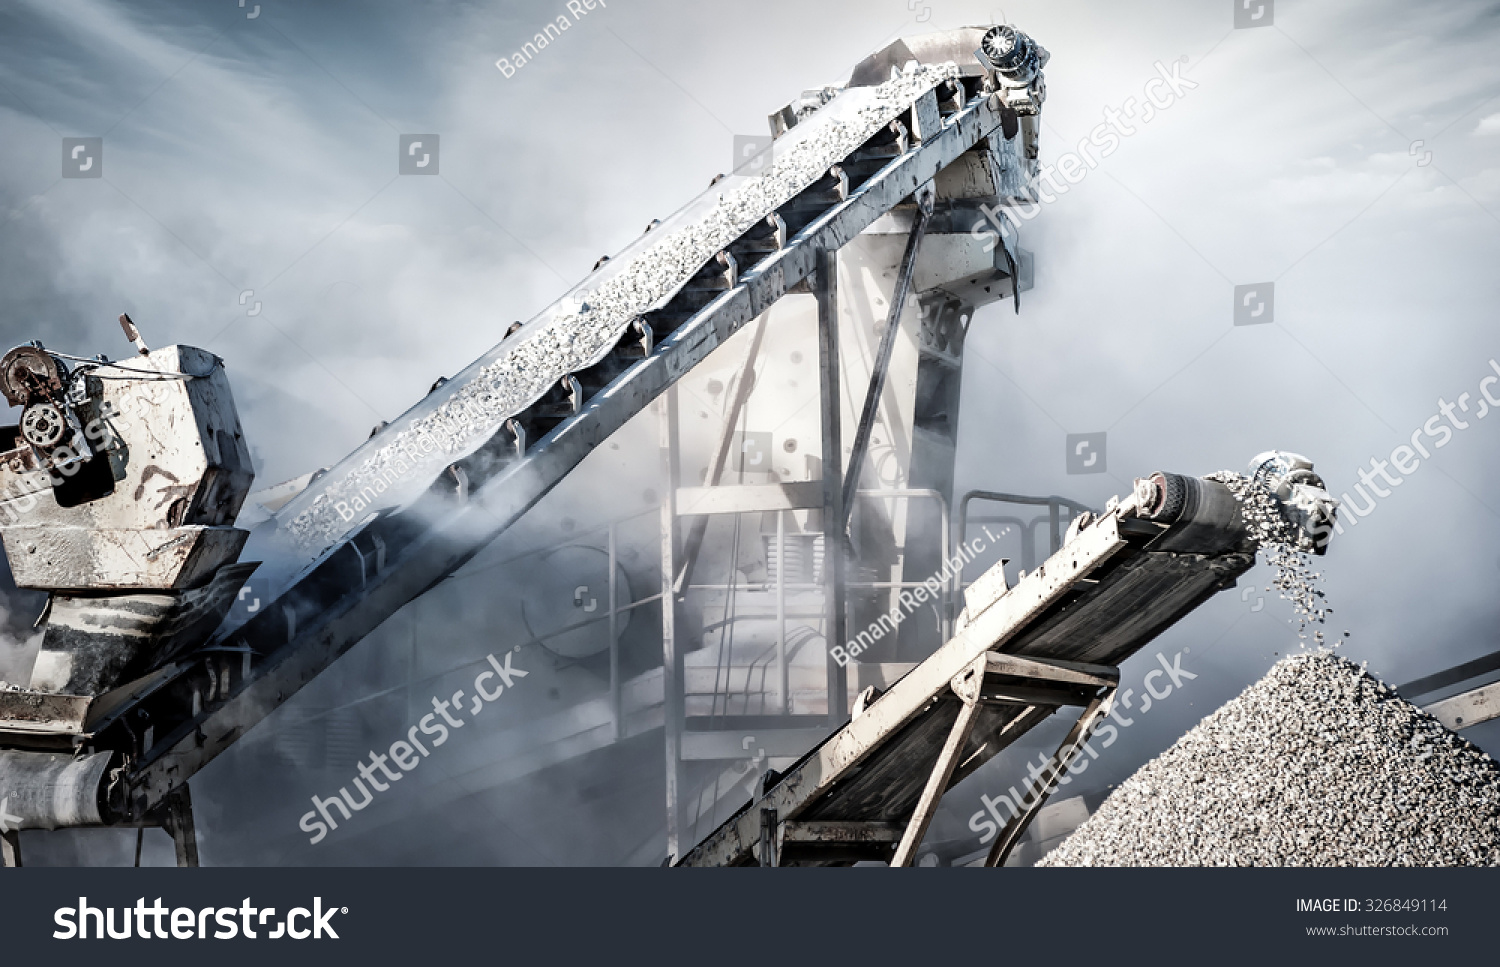 Cement production factory on mining quarry. Conveyor belt of heavy machinery loads stones and gravel  #326849114